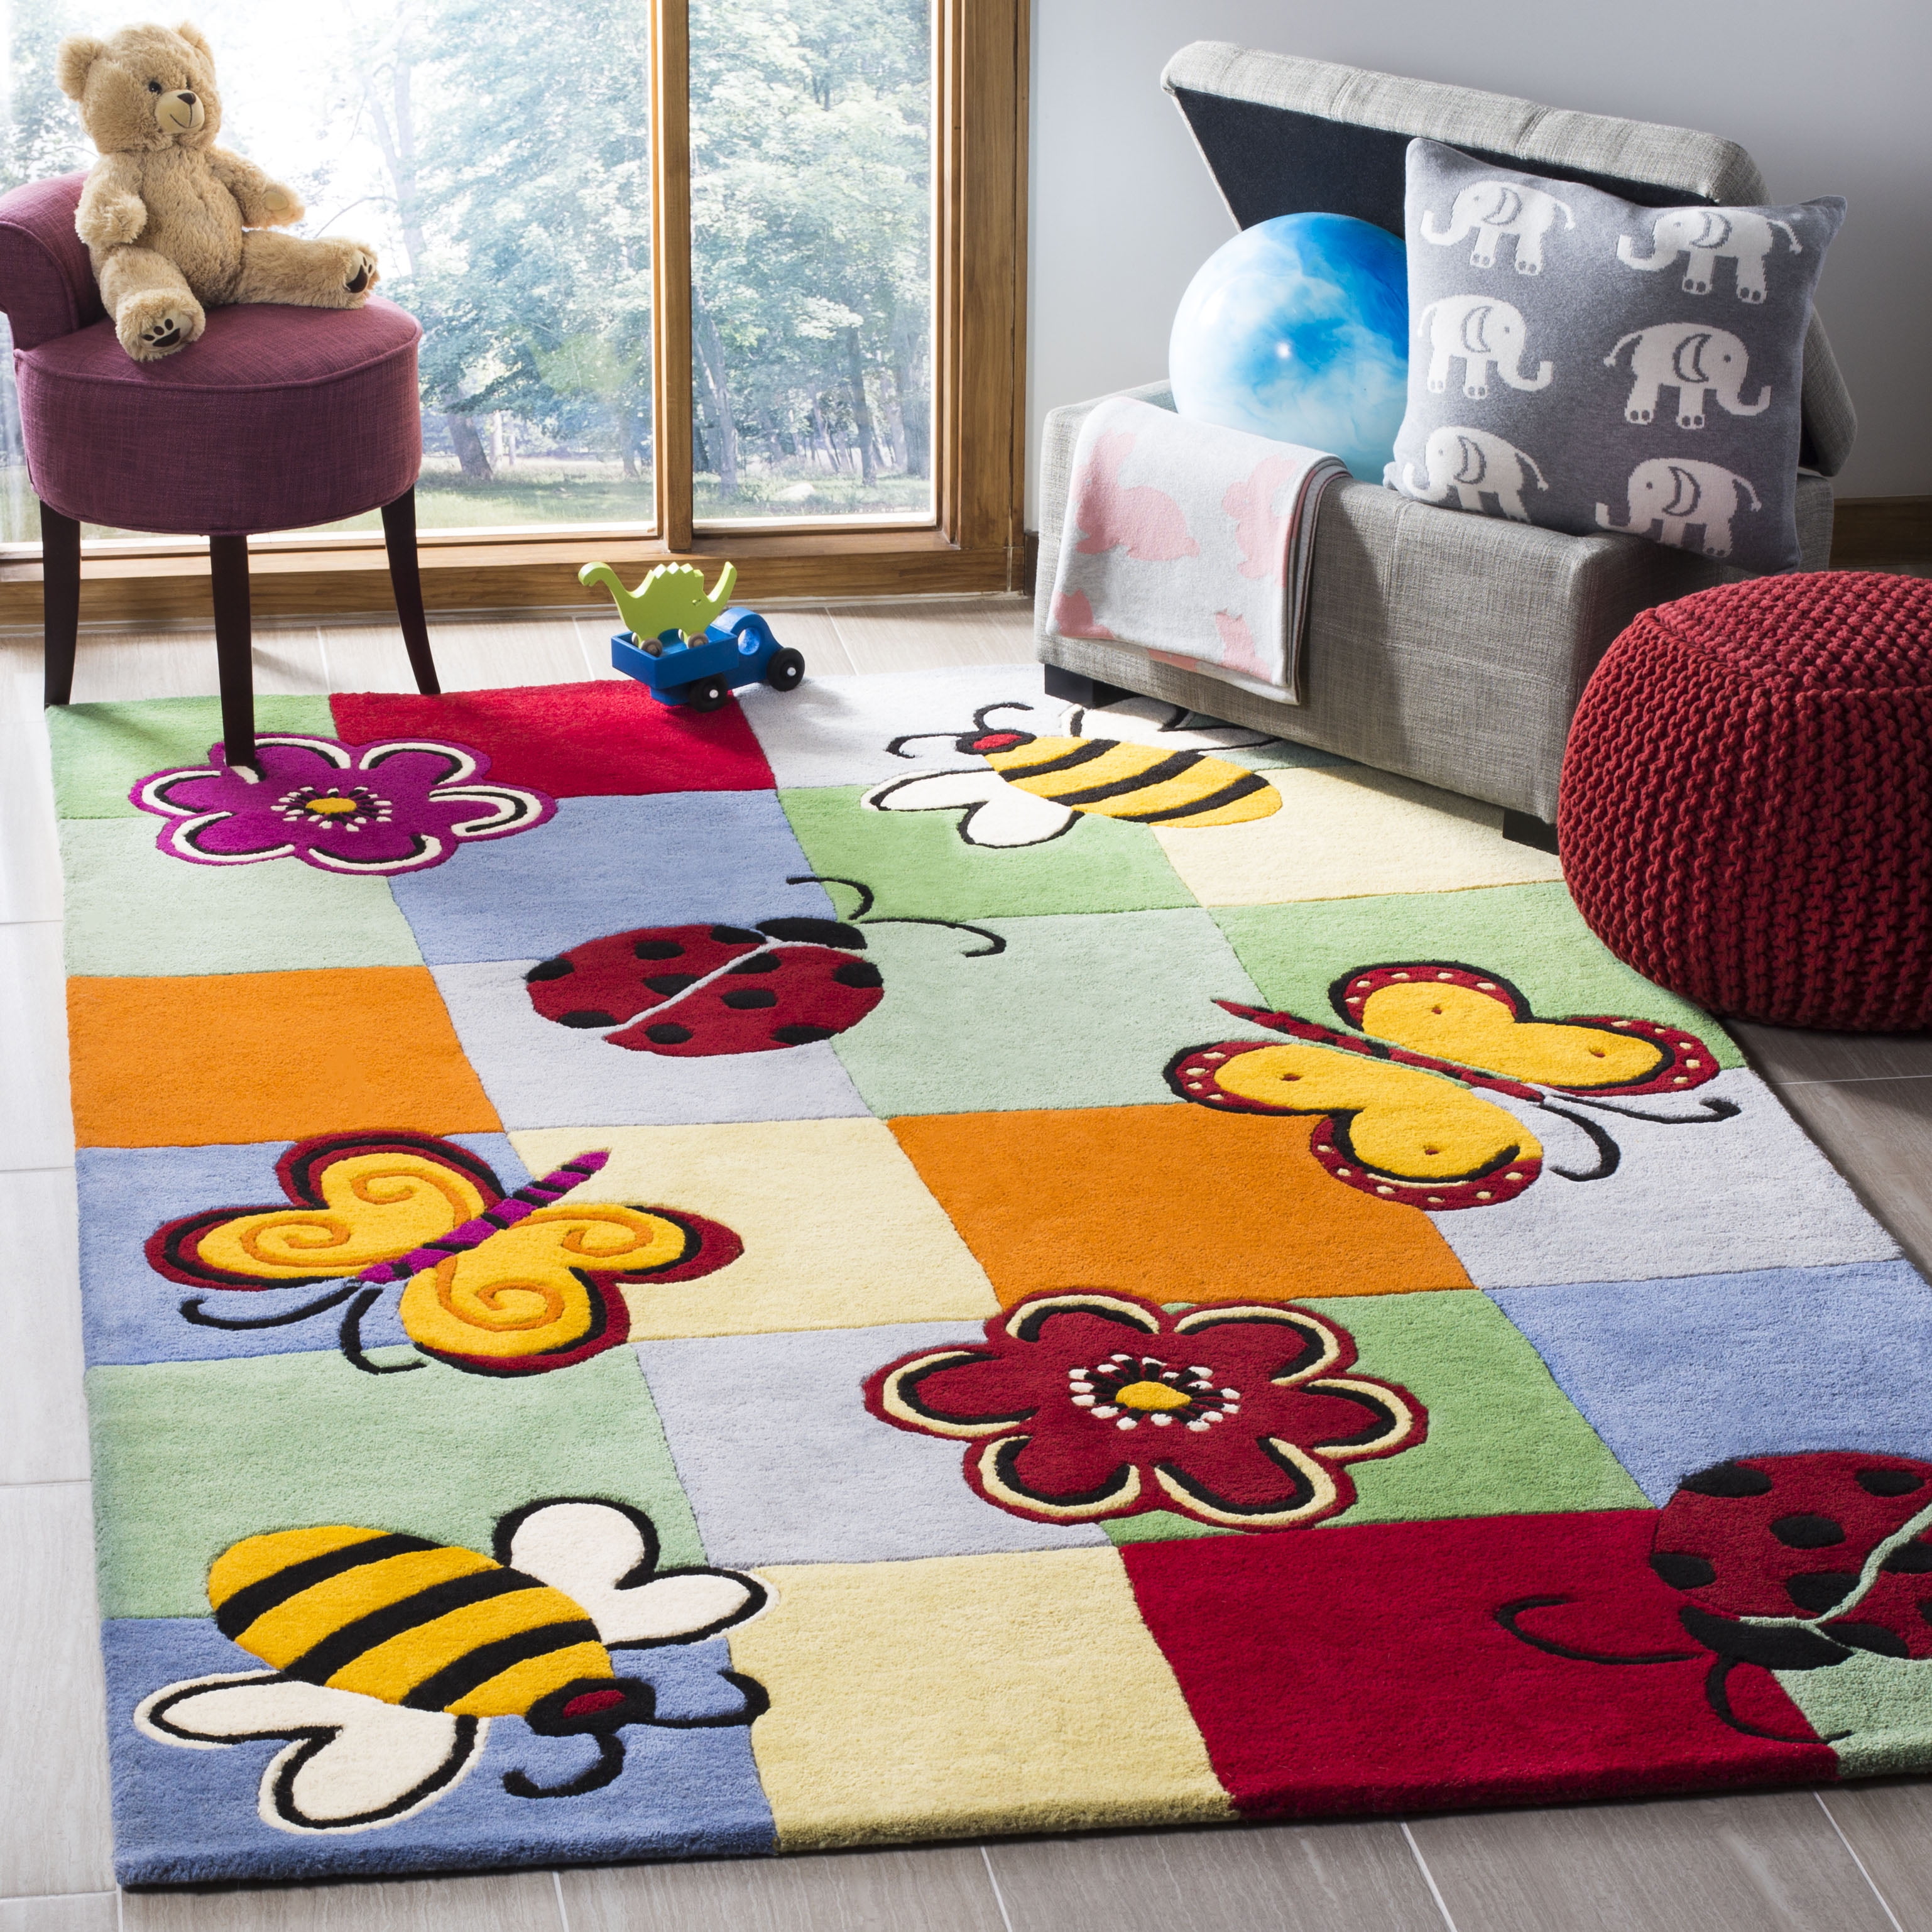 Orange Rug Kids Small Large Playroom Carpet Butterfly Hand Carved Childrens Mat 